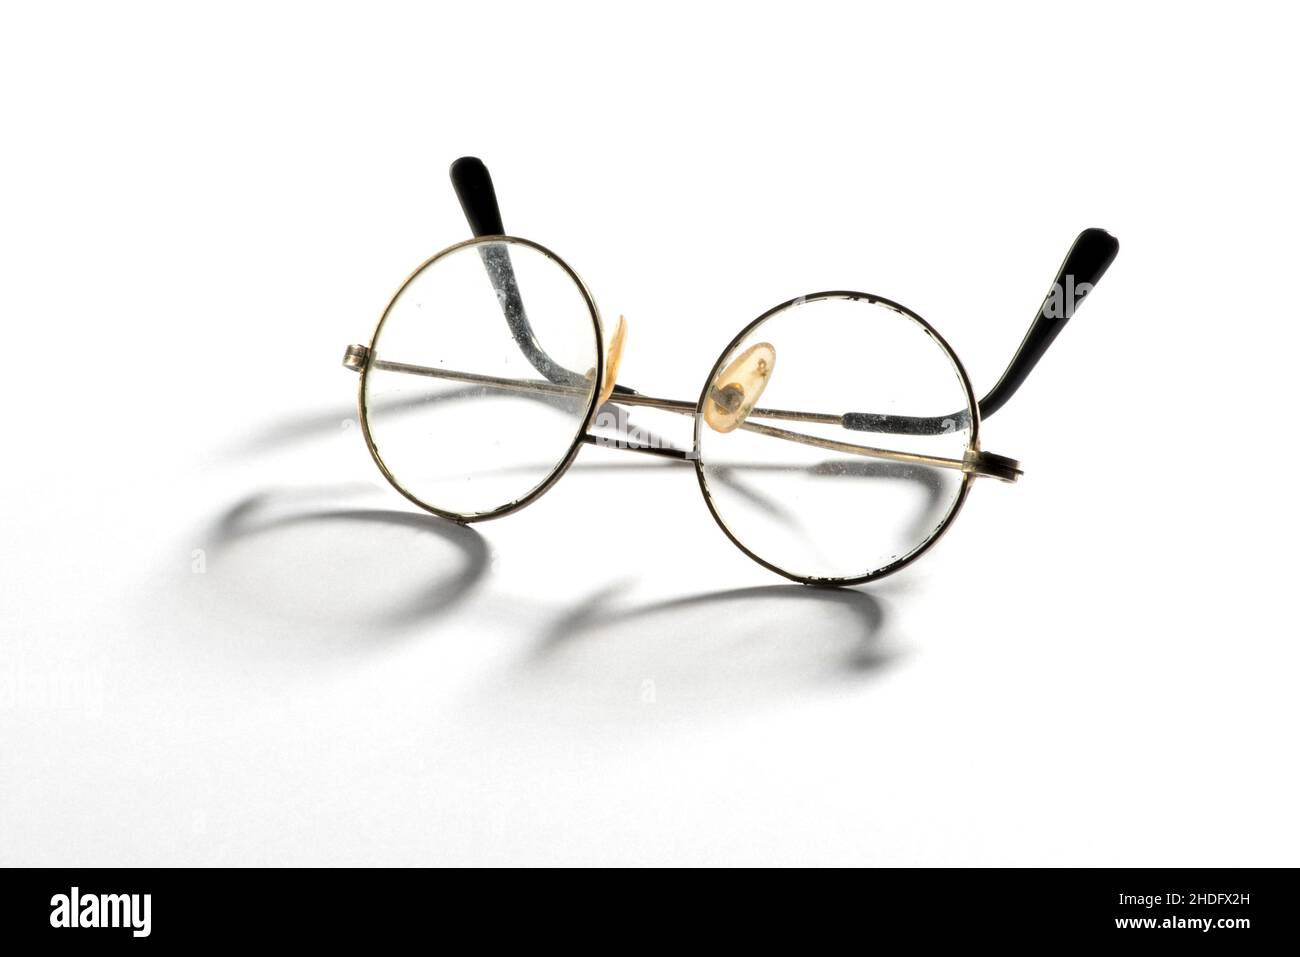 Vintage Glasses Frames High Resolution Stock Photography and Images - Alamy